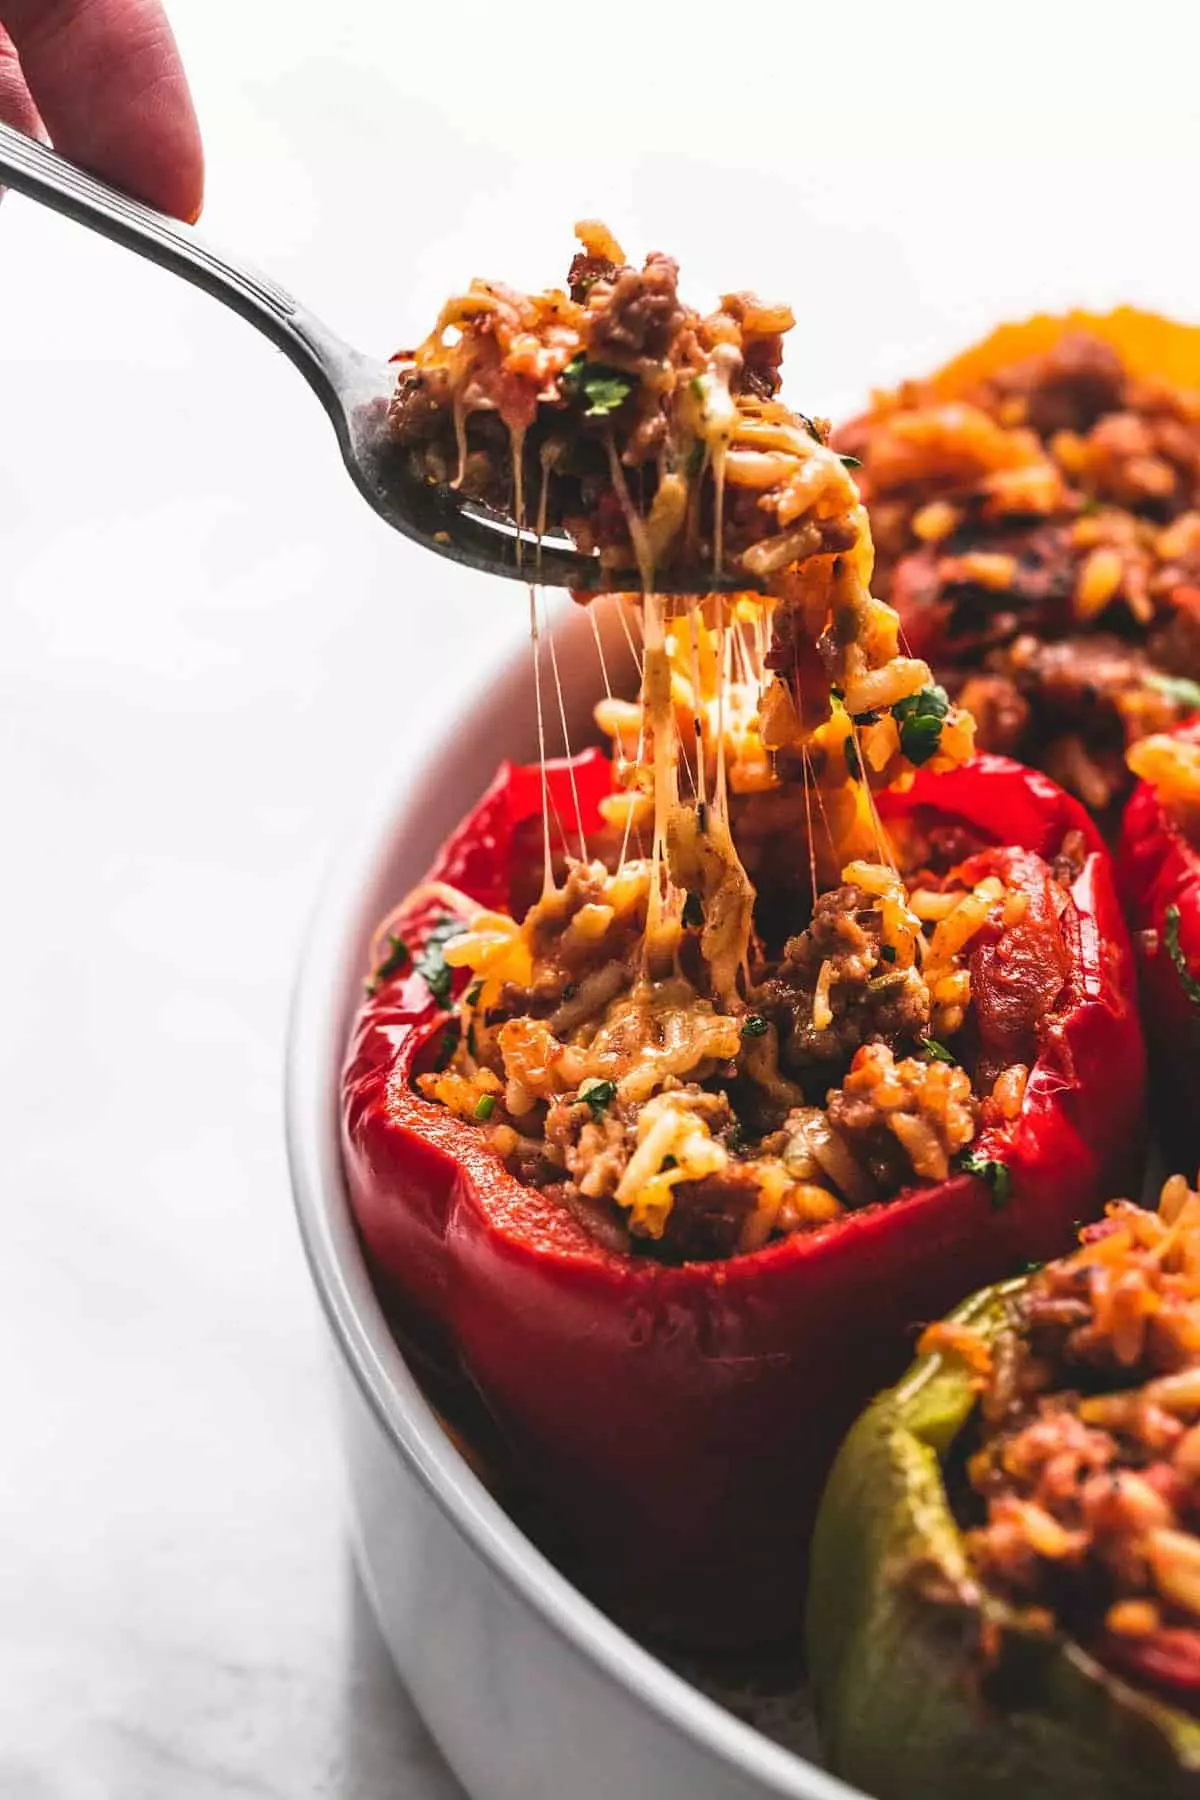 Serving suggestion for stuffed peppers